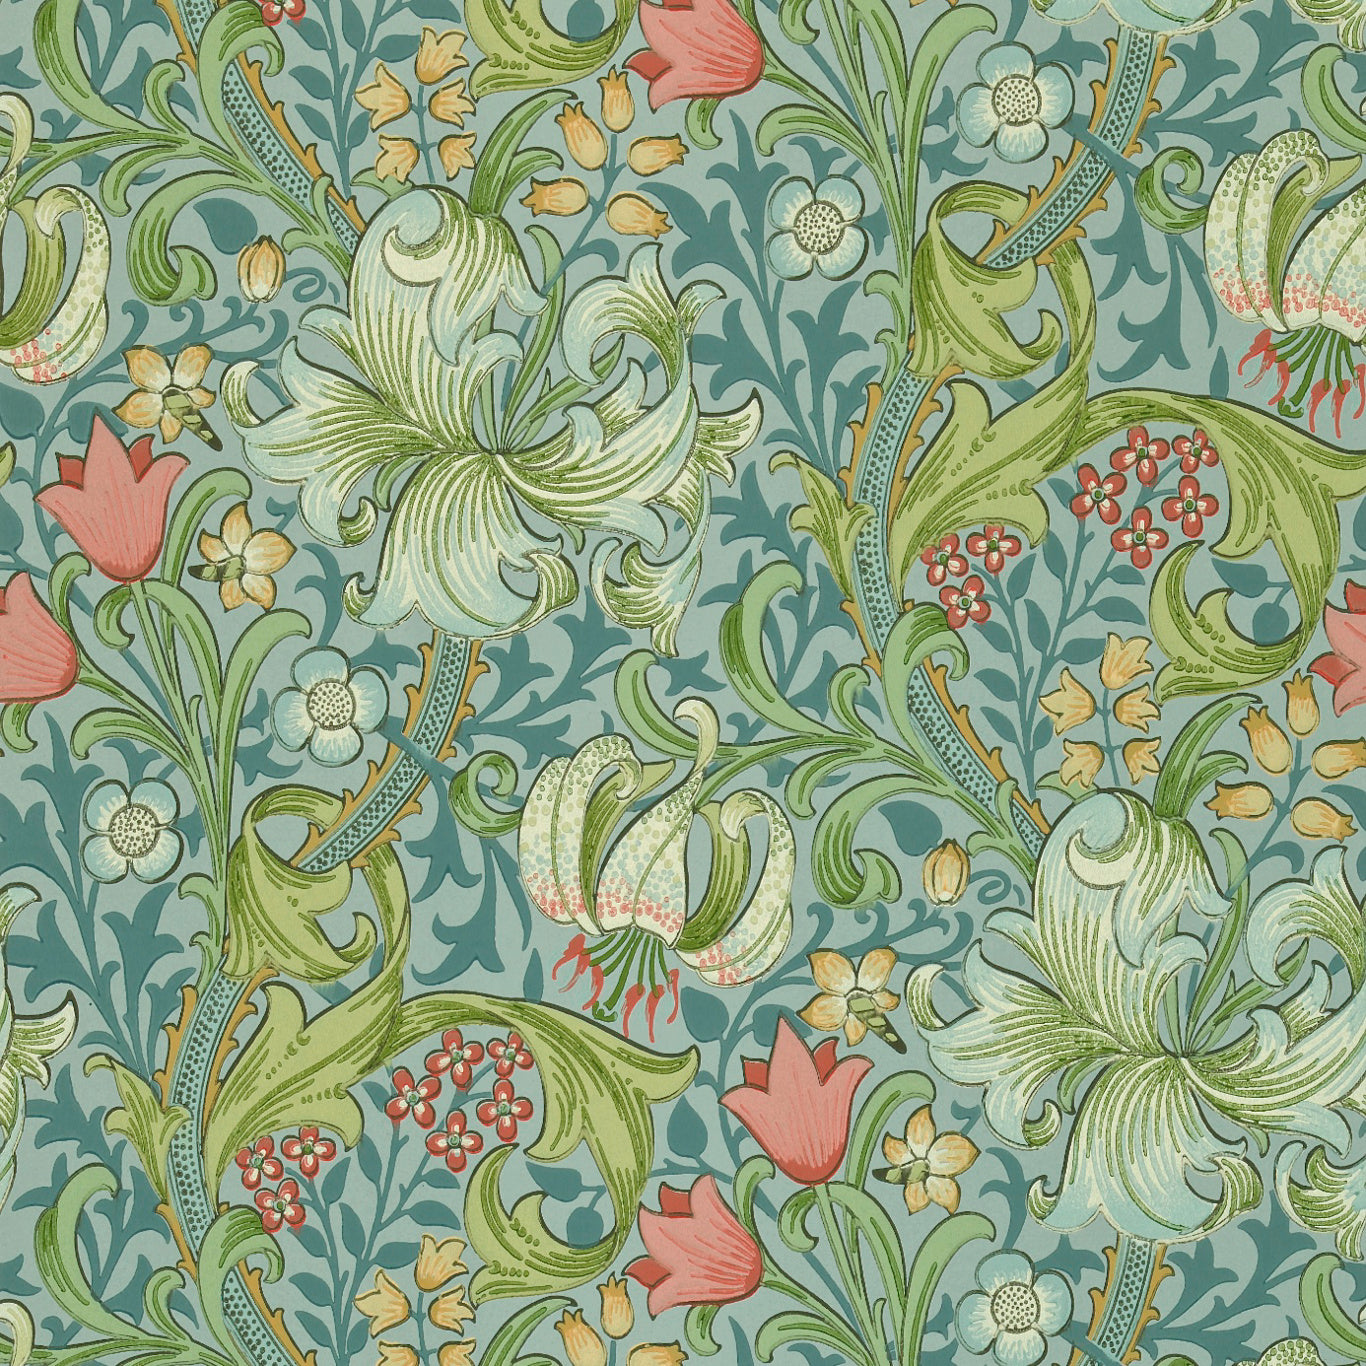 Golden Lily Mineral Wallpaper DMI1G3103 by Morris & Co